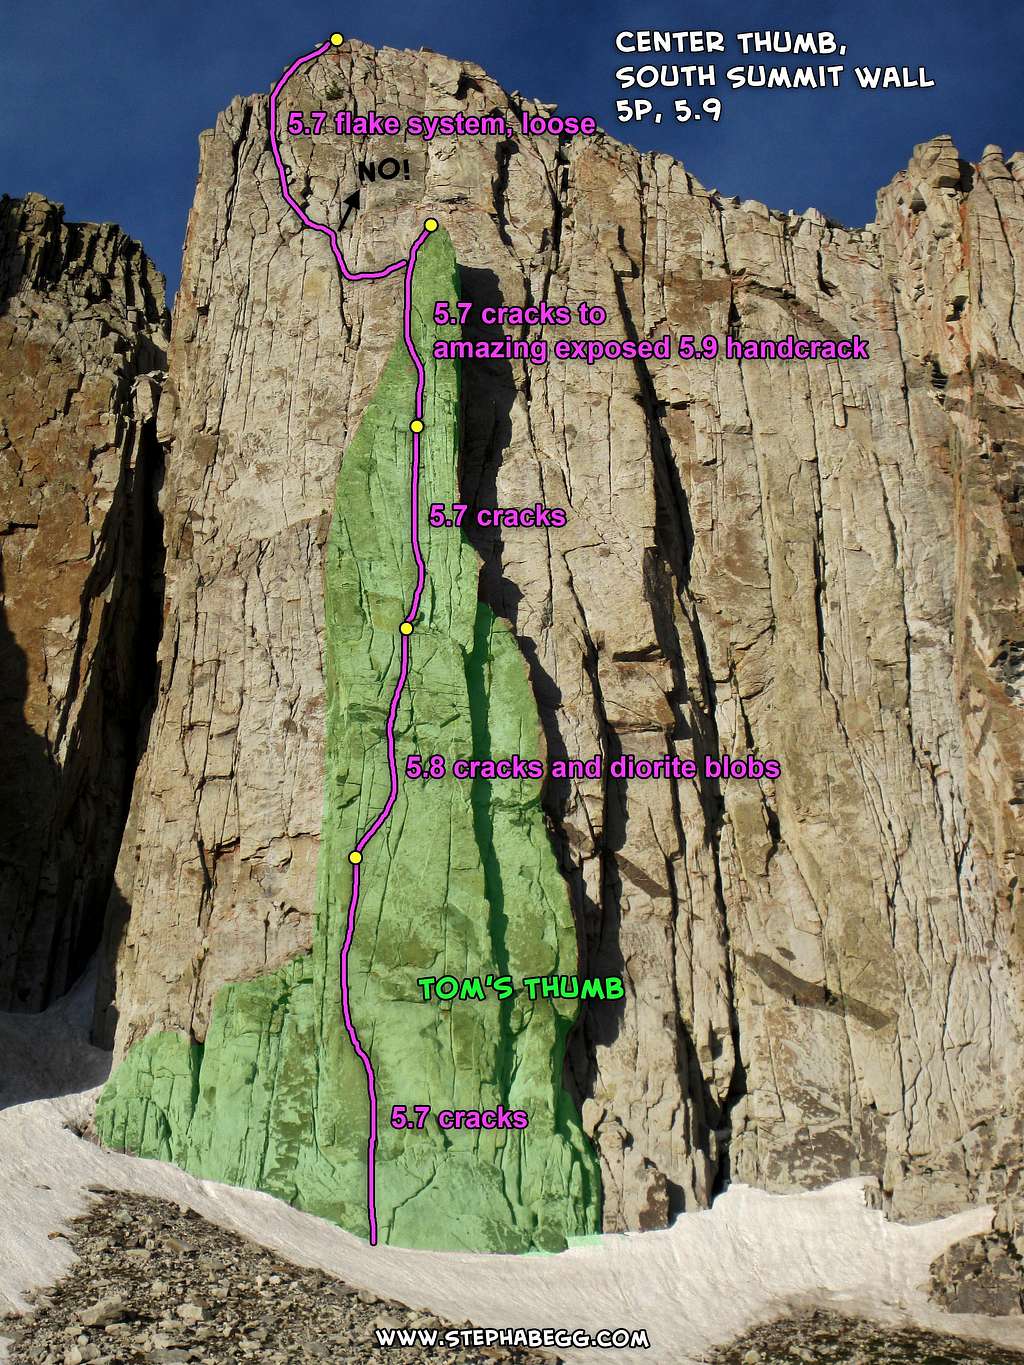 Route Overlay for Center Thumb on South Summit Wall of Lone Peak